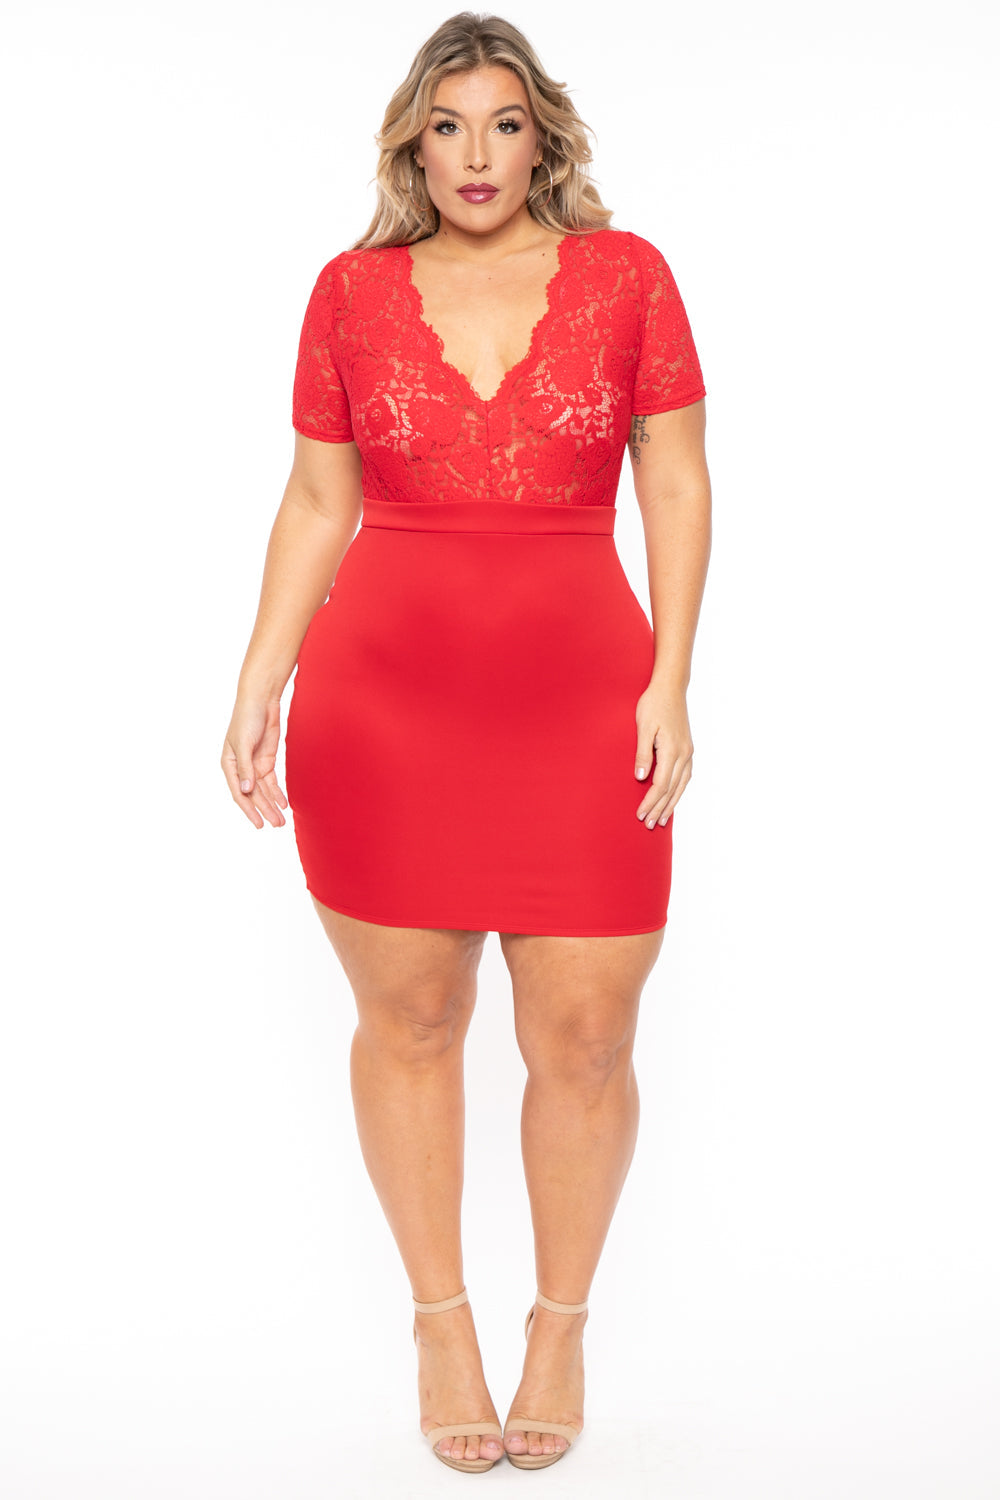 Plus Size Lace Top Dress - Red – Curvy